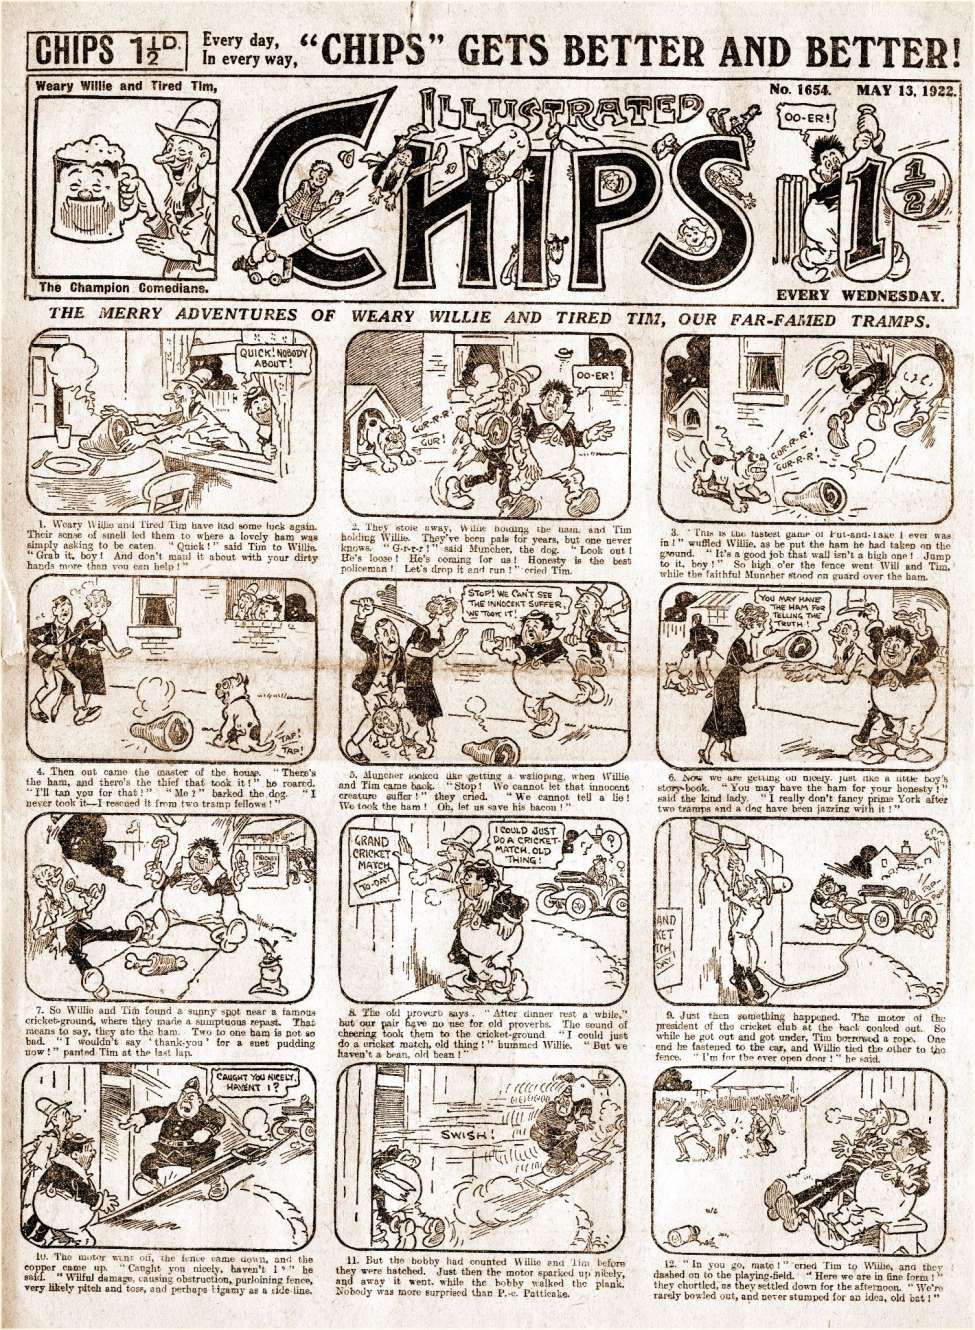 Book Cover For Illustrated Chips 1654